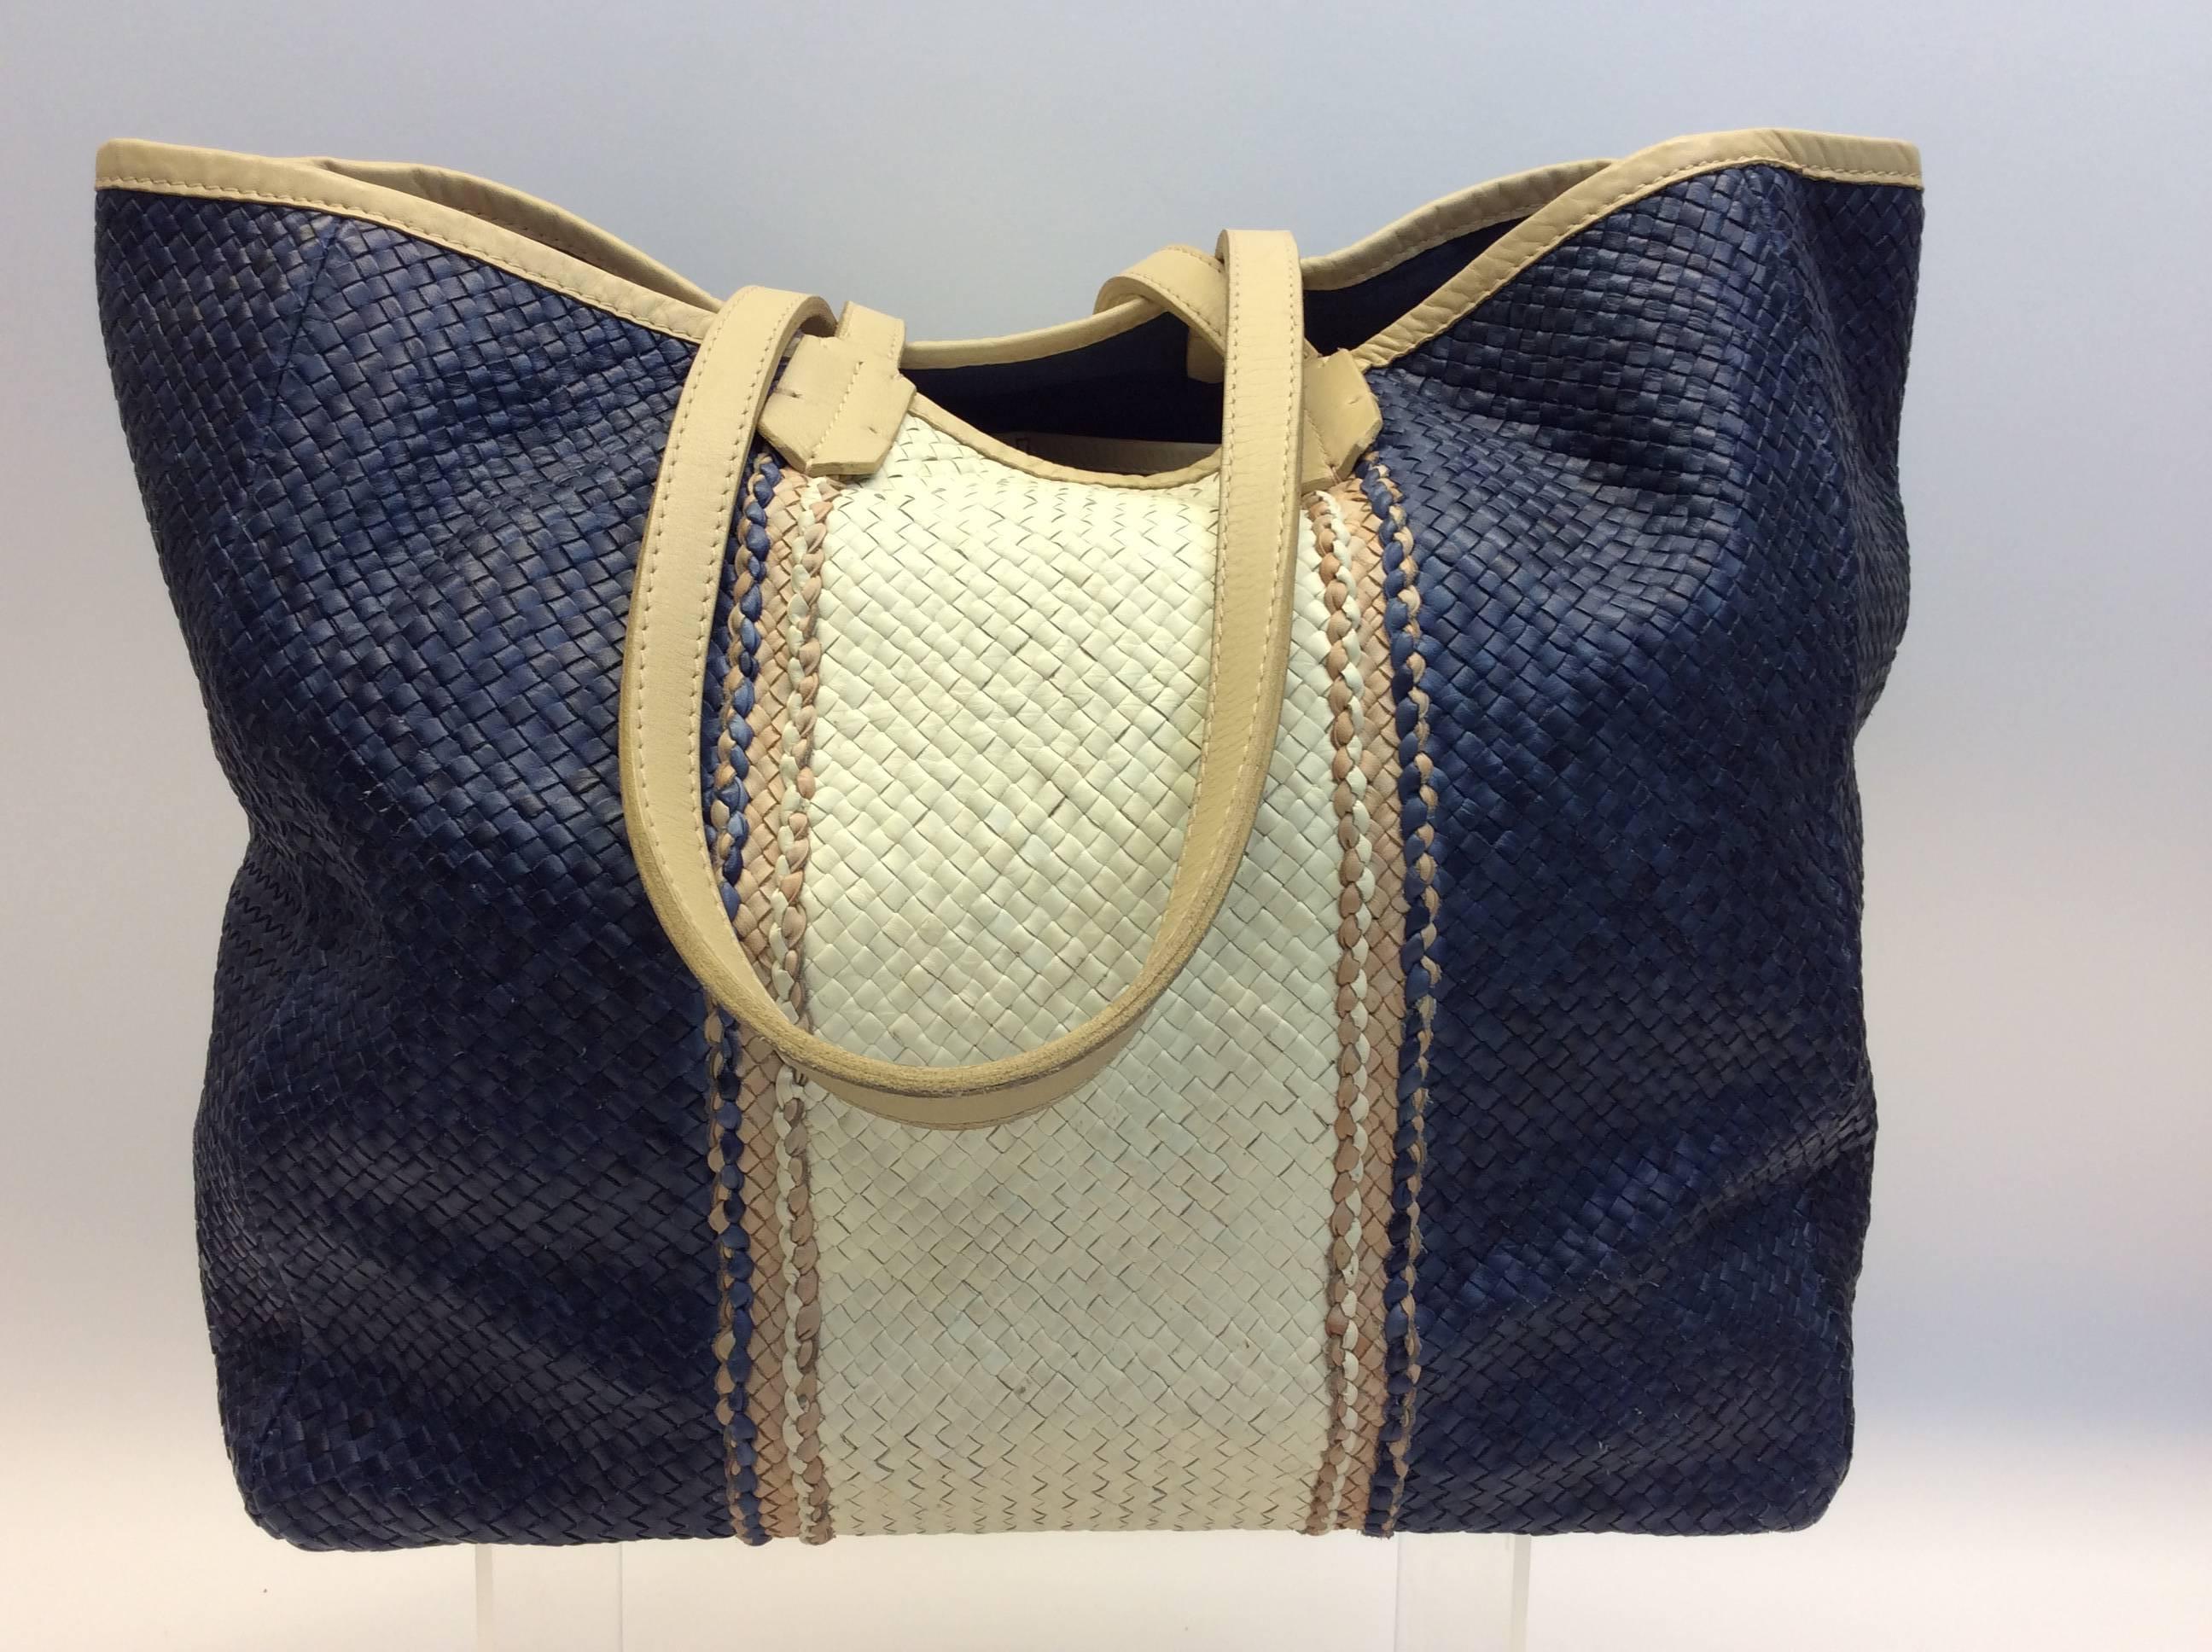 Lance Woven Leather Blue and White Tote In Excellent Condition For Sale In Narberth, PA